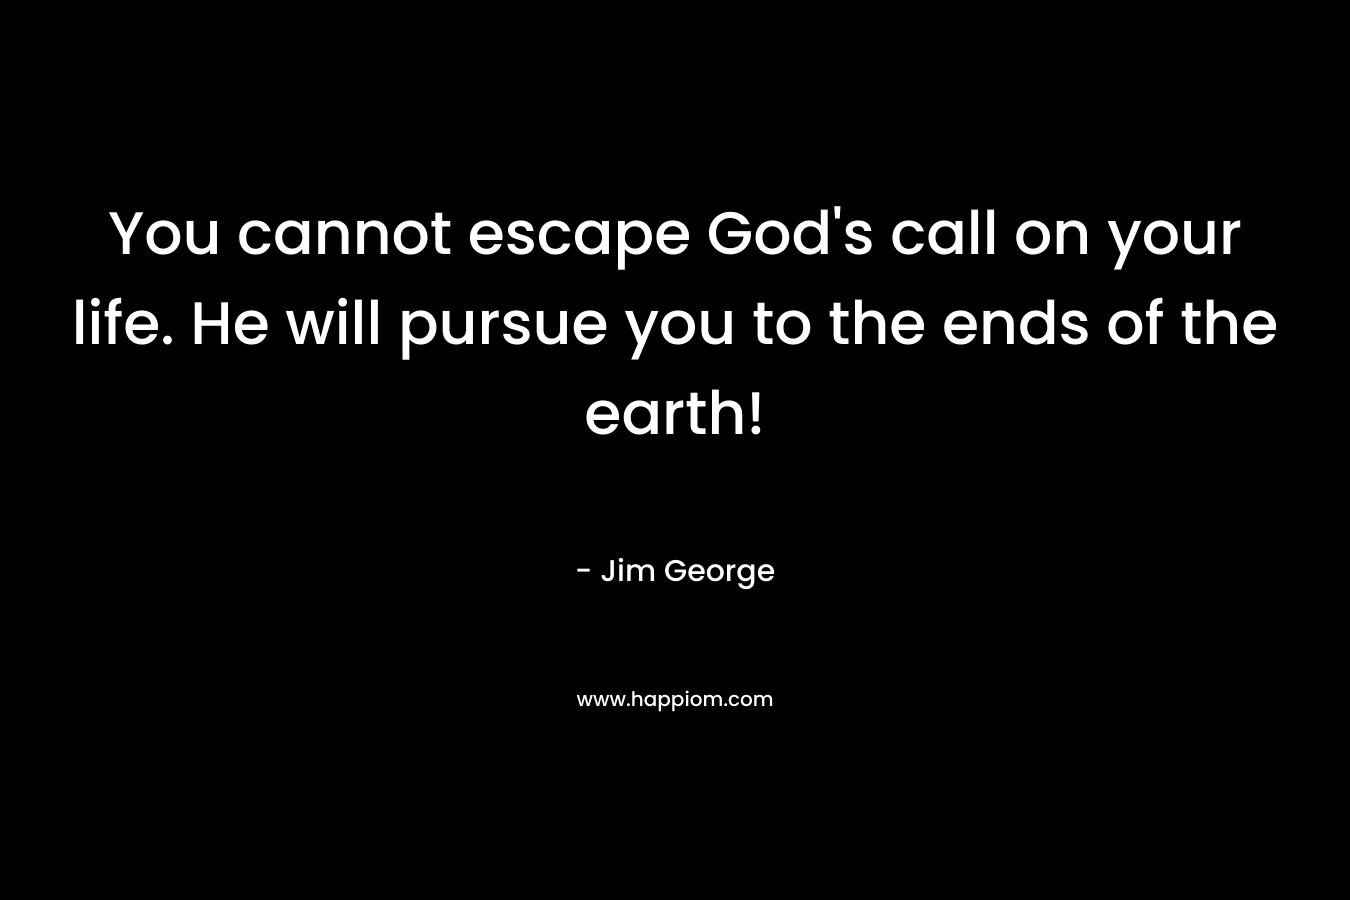 You cannot escape God's call on your life. He will pursue you to the ends of the earth!